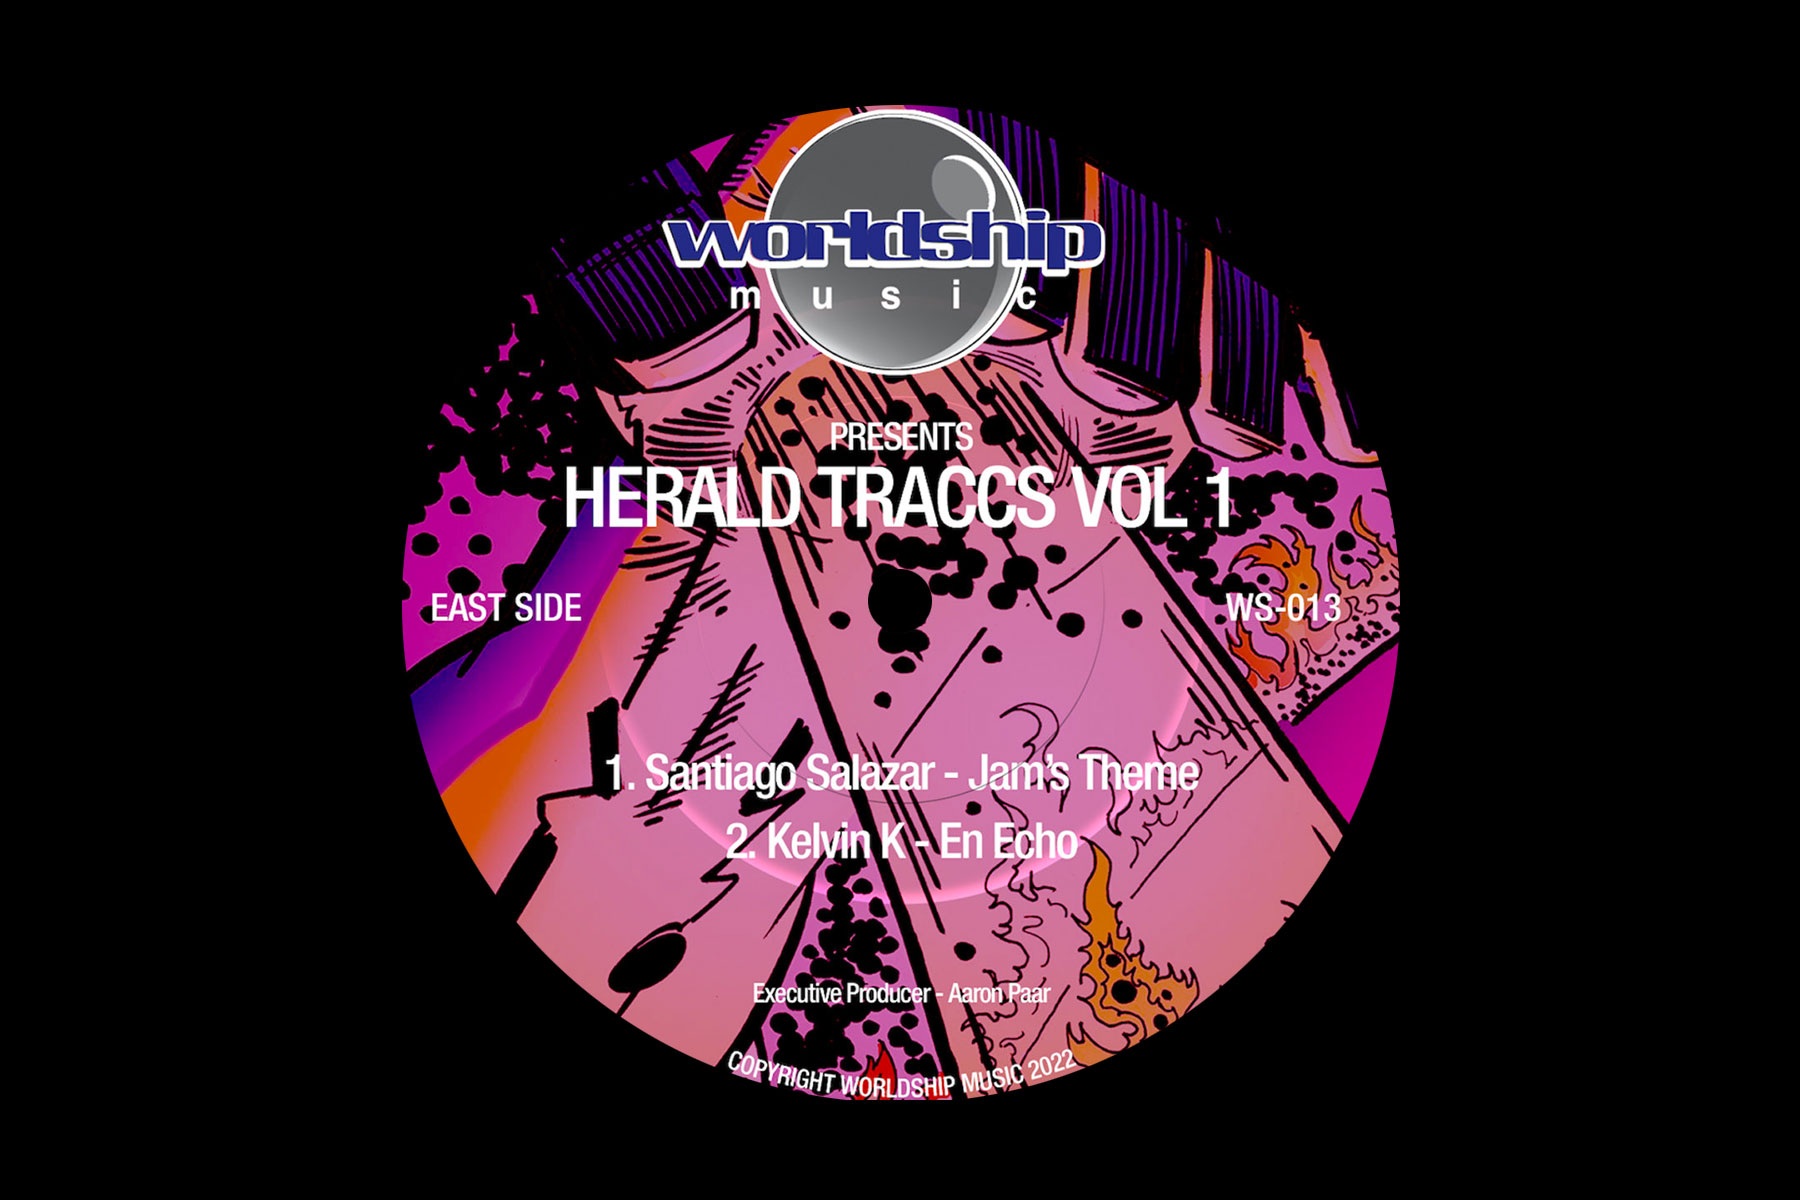 An unparalleled V/A from Worldship on Herald Traccs Vol 1